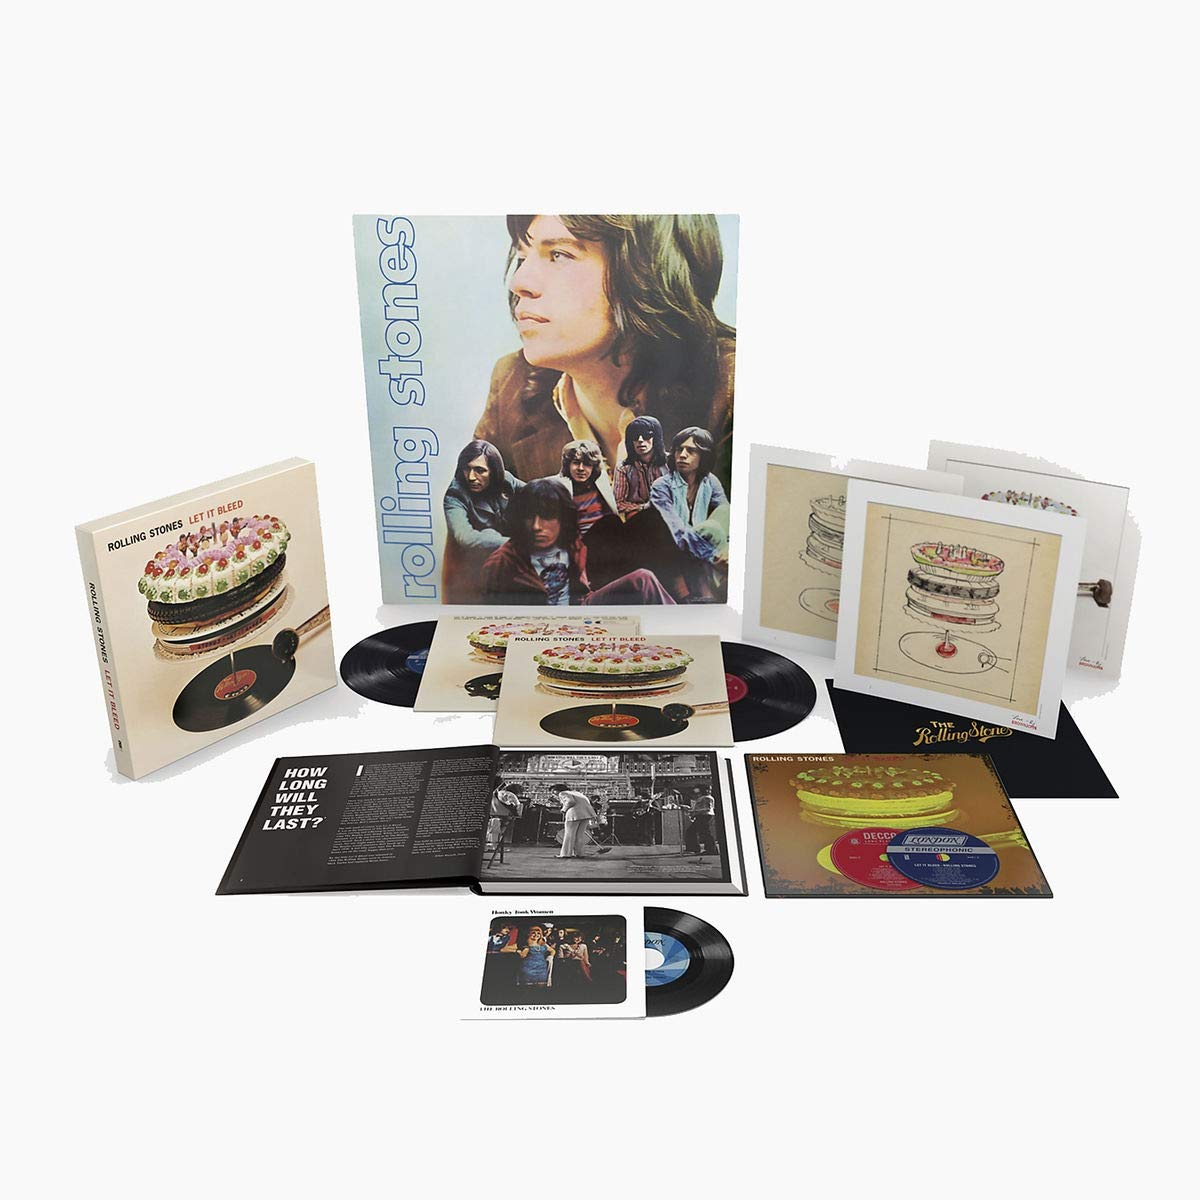 ROLLING STONES / ローリング・ストーンズ / LET IT BLEED (50TH ANNIVERSARY LIMITED DELUXE EDITION 180G 2LP+2HYBRID SACD+7" BOX)